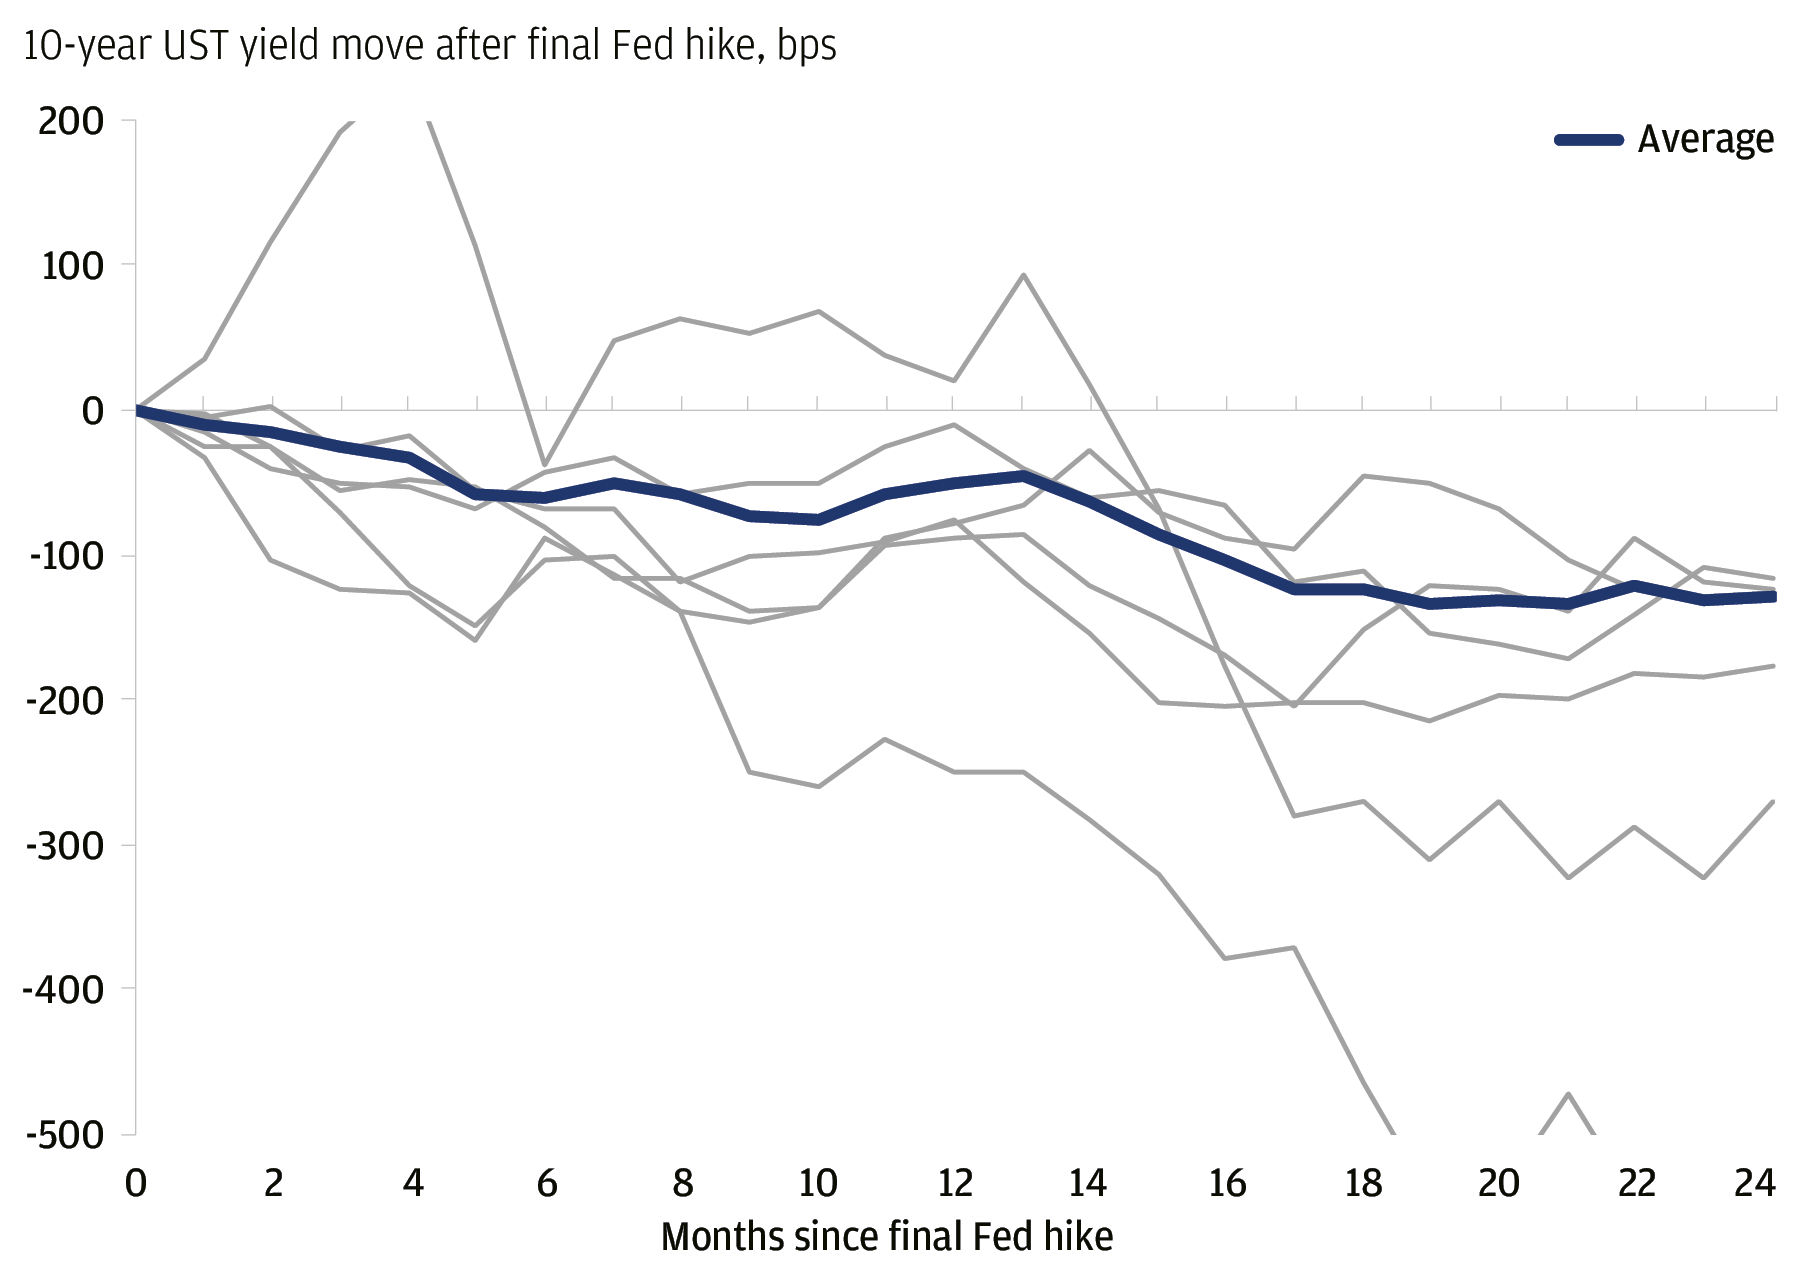 This graph has multiple grey lines representing yield patterns of the 10-year UST after final Fed hikes from 0 to 24 months.  The dark blue line shows the average of these and indicates a general downward trend.